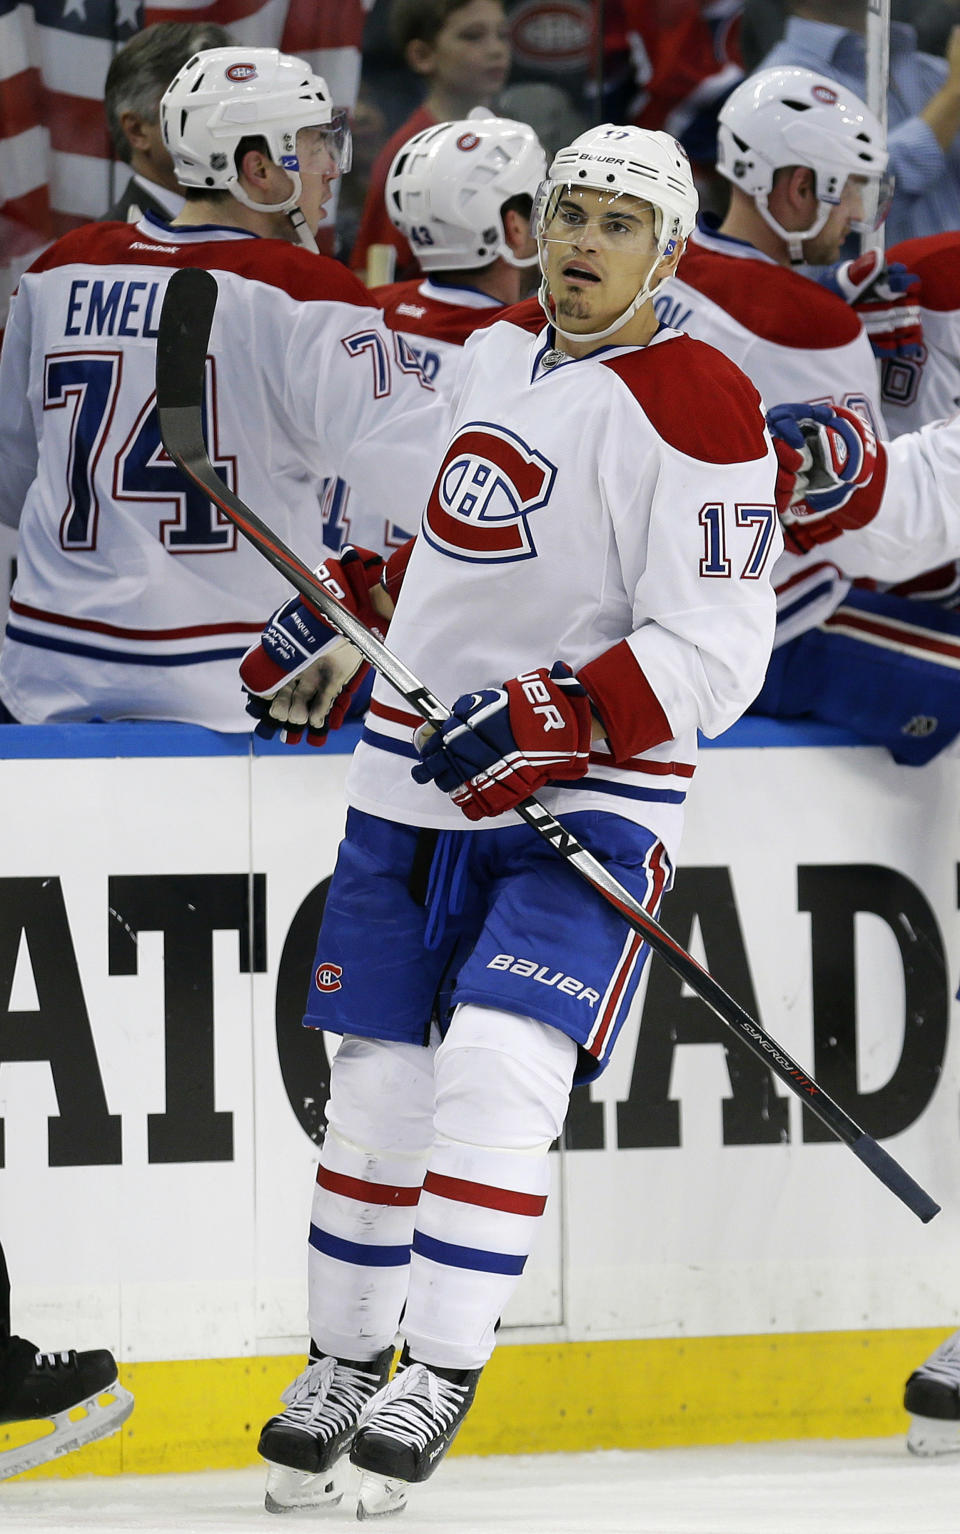 Montreal Canadiens left wing Rene Bourque (17) celebrates with teammates after scoring against the Tampa Bay Lightning during the second period of Game 2 of a first-round NHL hockey playoff series on Friday, April 18, 2014, in Tampa, Fla. (AP Photo/Chris O'Meara)